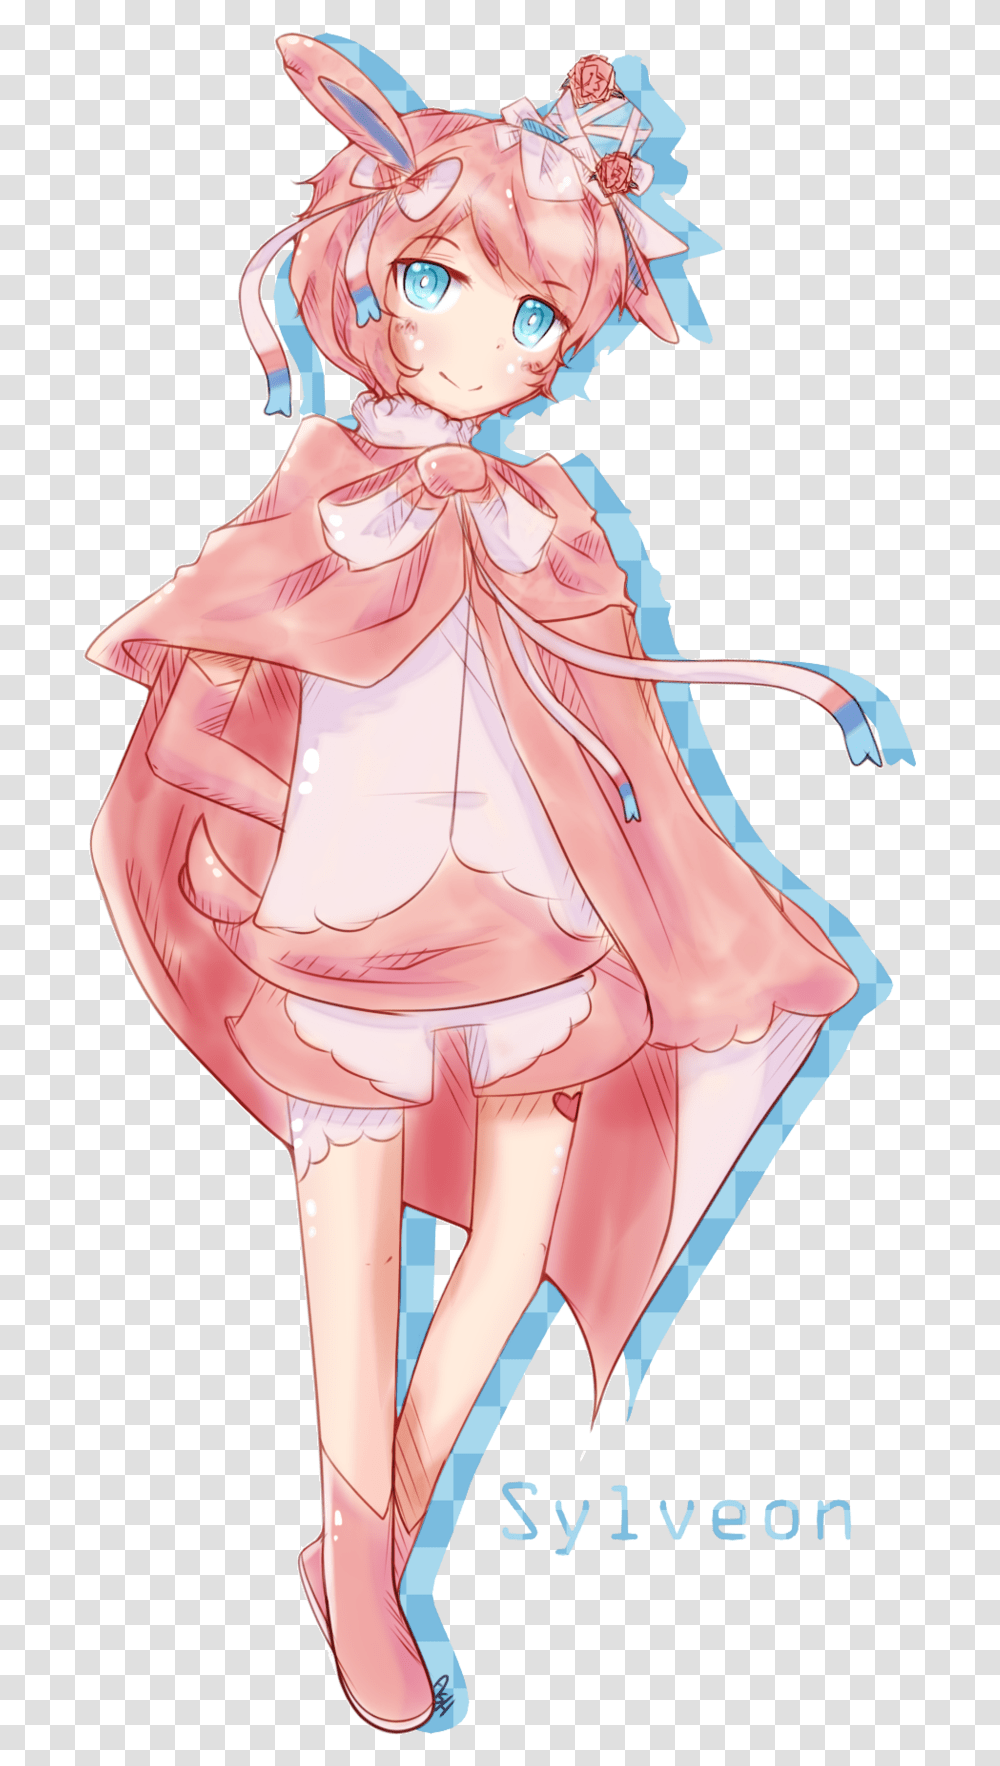 Eeveelutions Pikachu Pokemon Sylveon, Clothing, Doll, Toy, Person Transparent Png